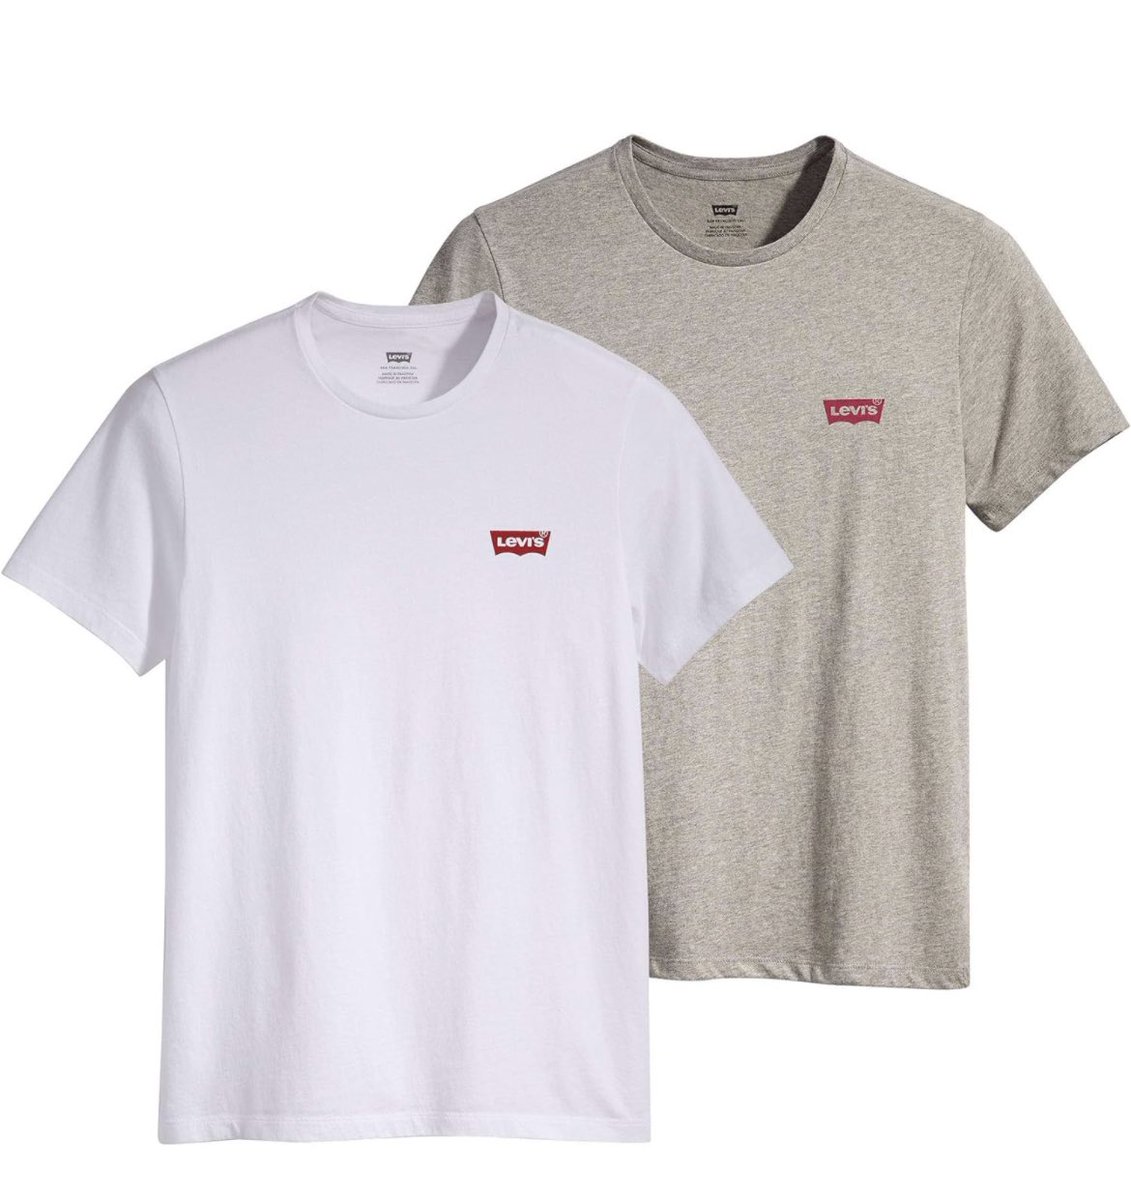 Get these 2 Levis t shirts for ONLY £11 

Get them here ➡️ amzn.to/447HNpM

# ad